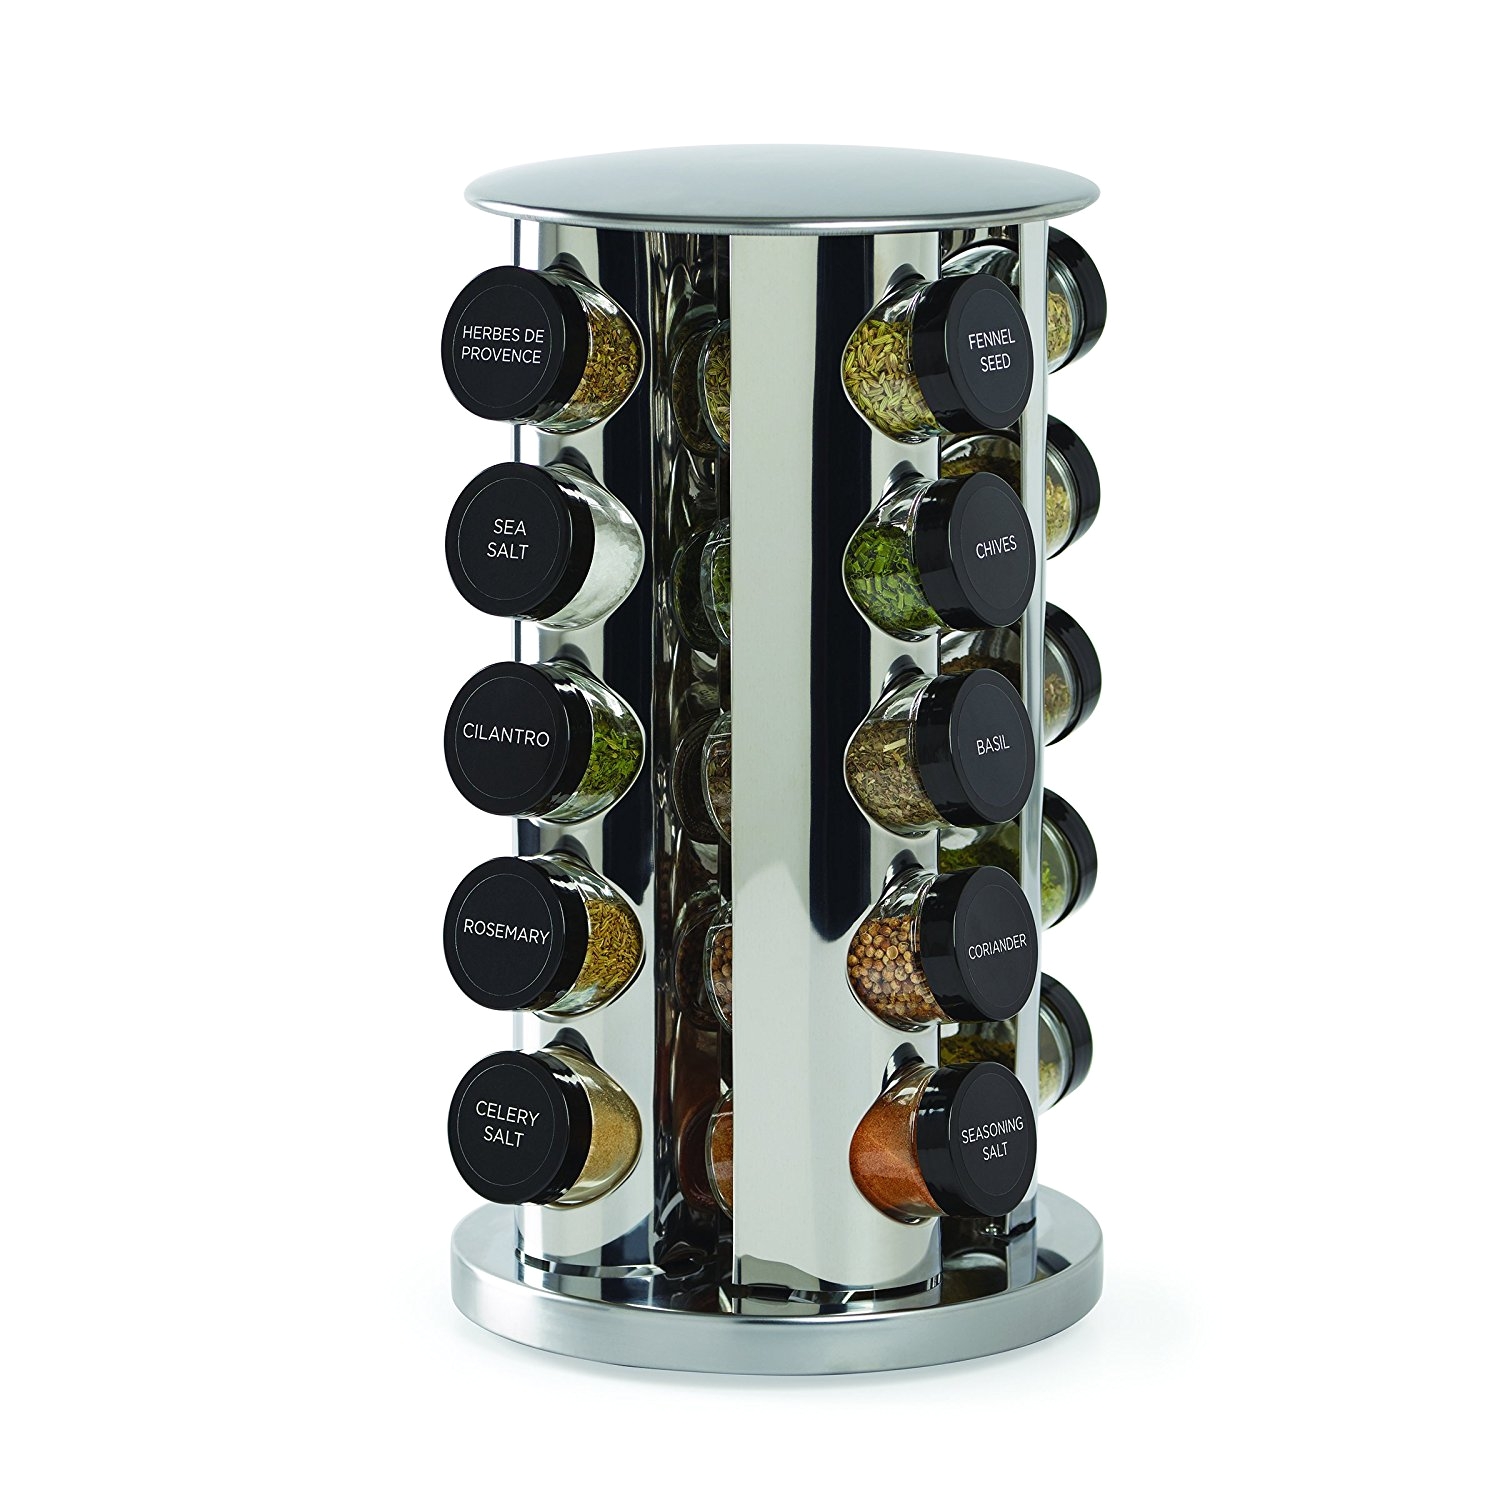 amazon com kamenstein 20 jar revolving spice tower with free spice refills for 5 years spice racks kitchen dining